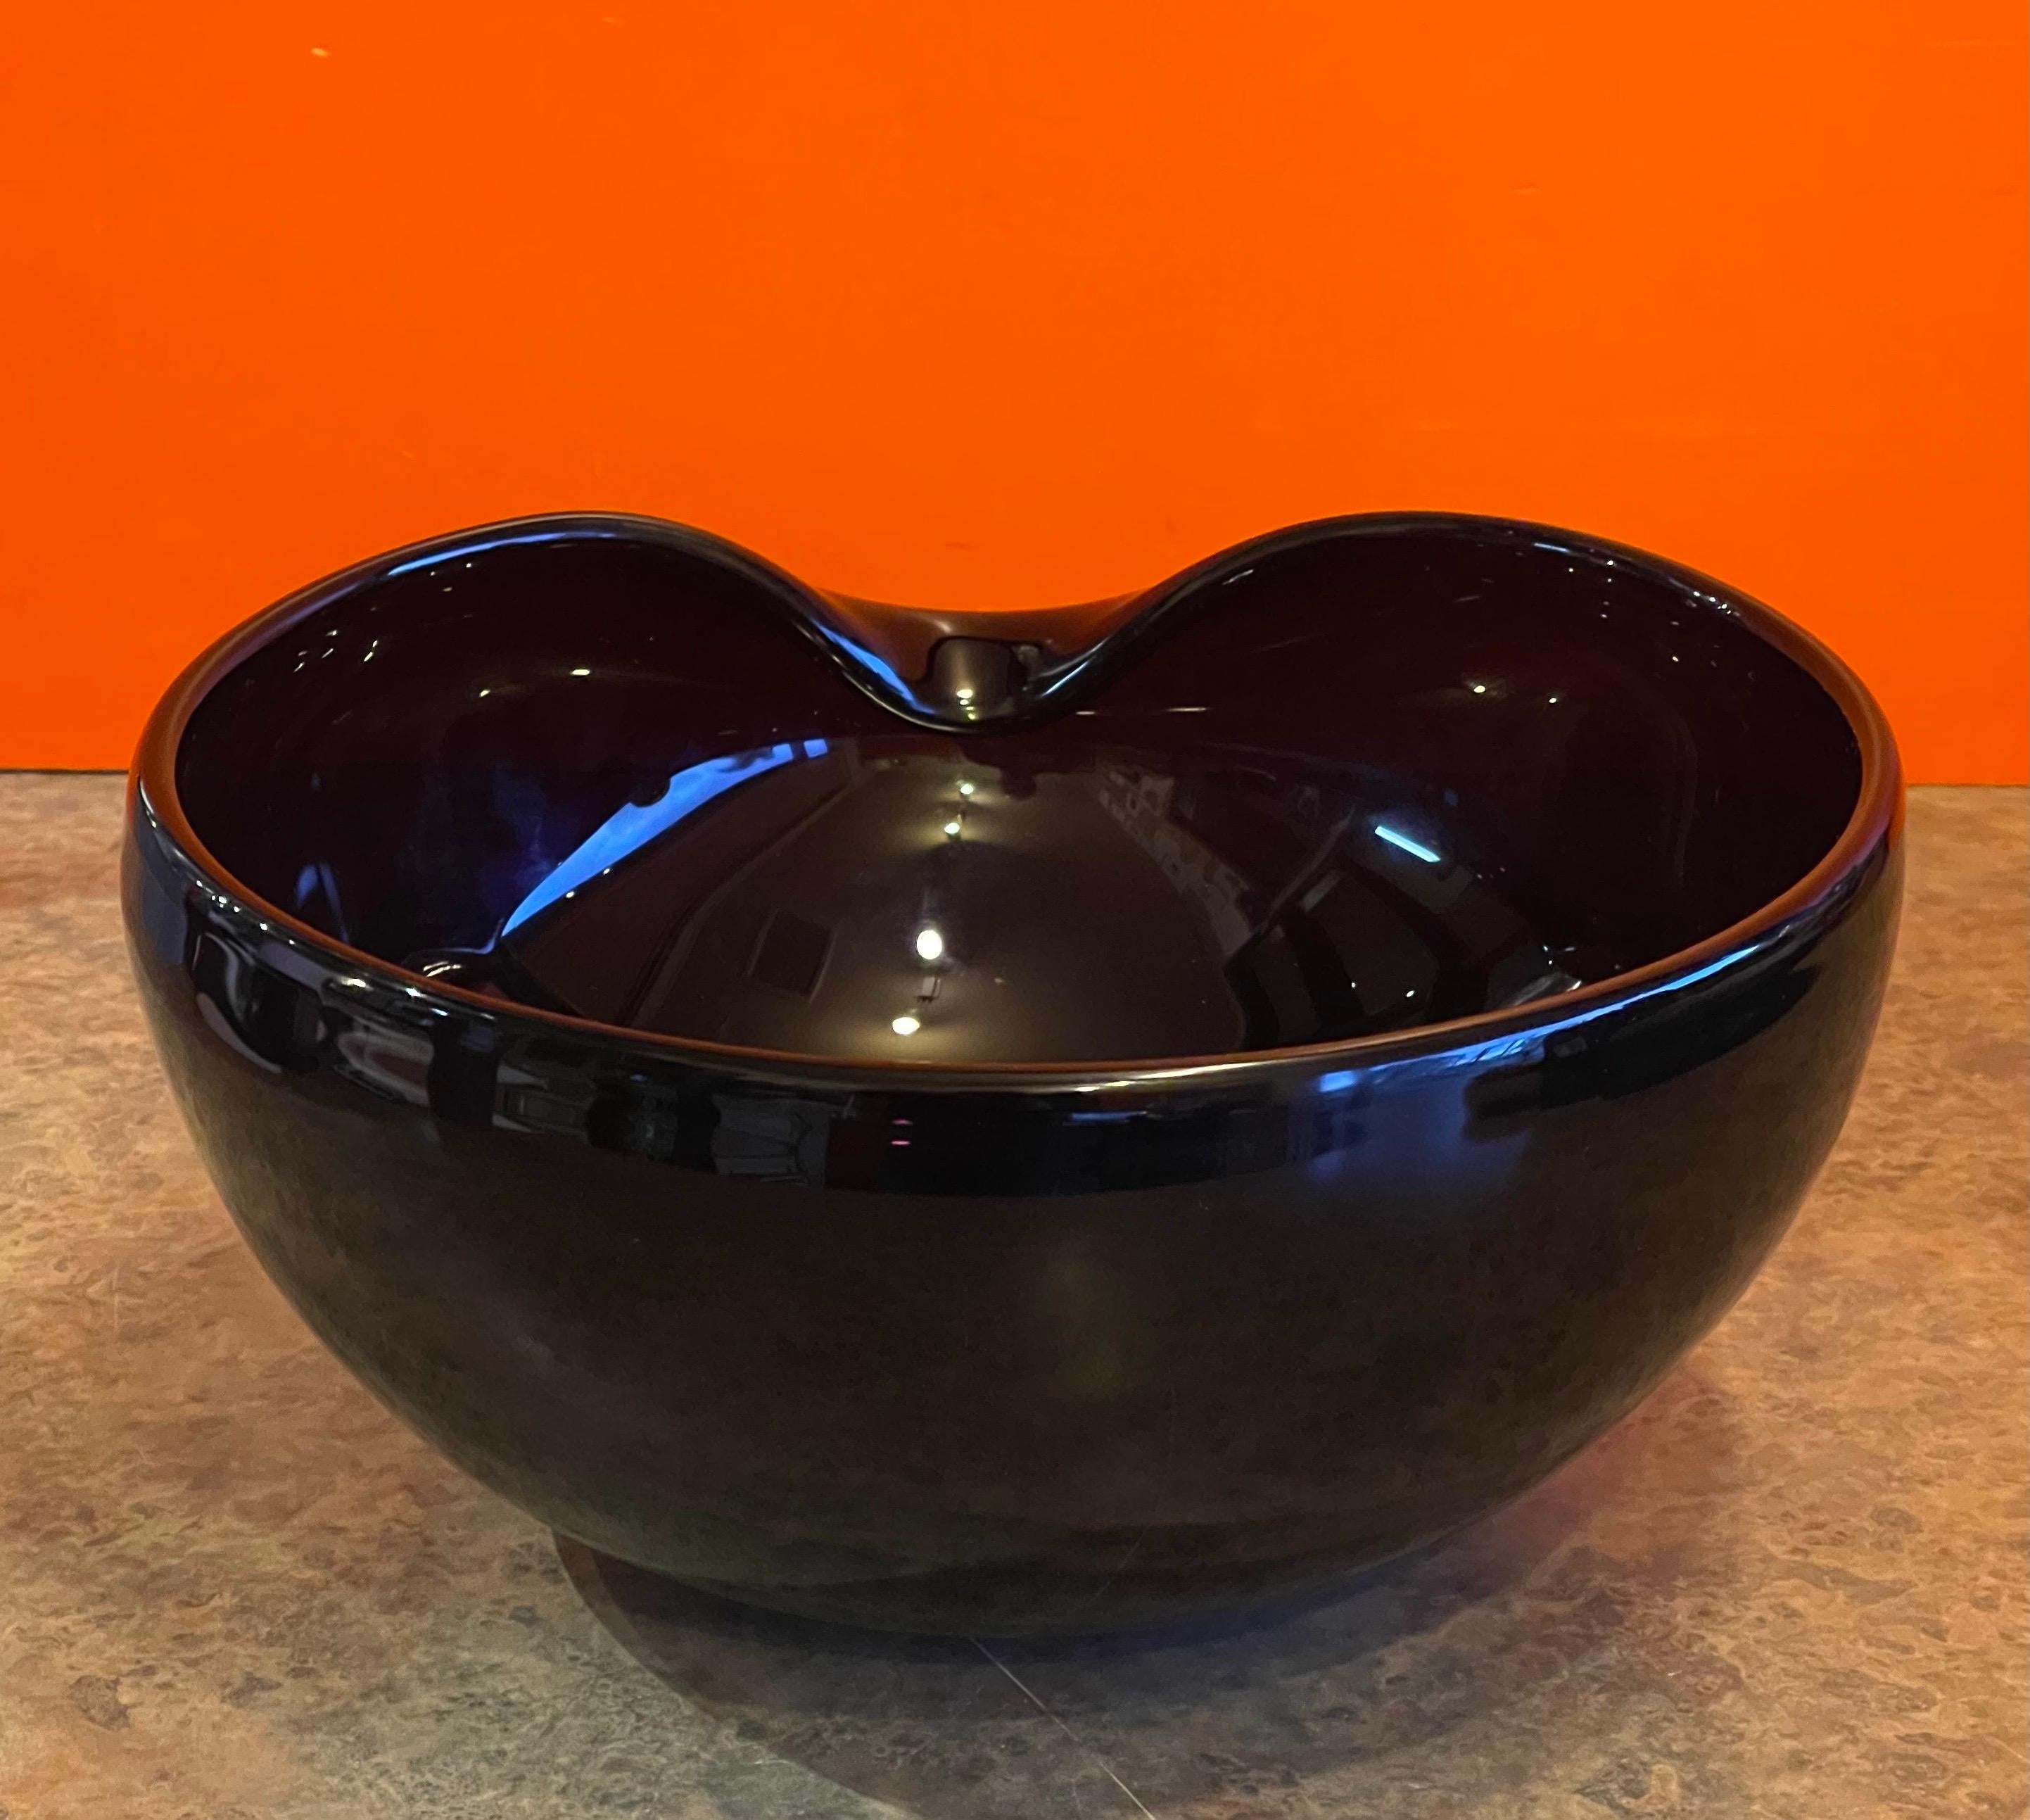 20th Century Black Thumbprint Art Glass Centerpiece Bowl by Elsa Peretti for Tiffany and Co.